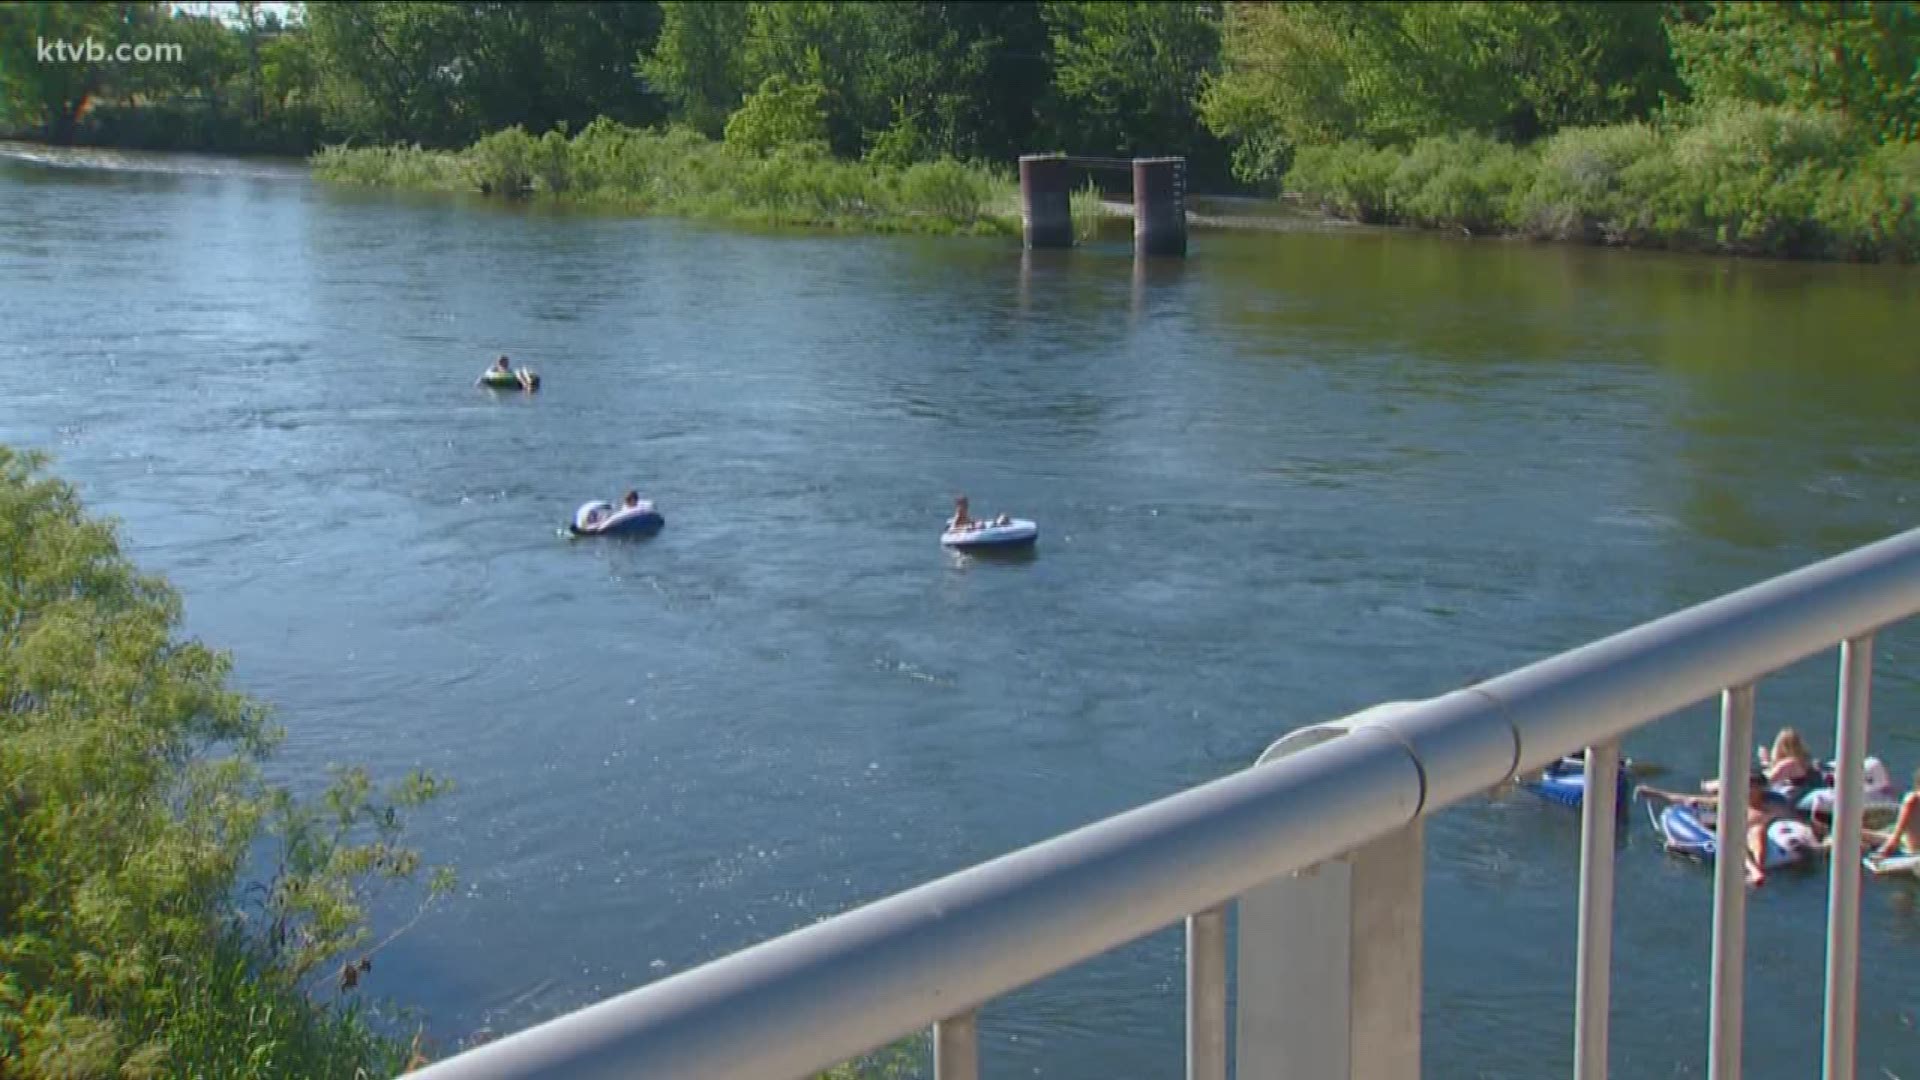 One person died and four others were taken to the hospital Thursday afternoon after an apparent floating accident on the Payette River in Emmett.